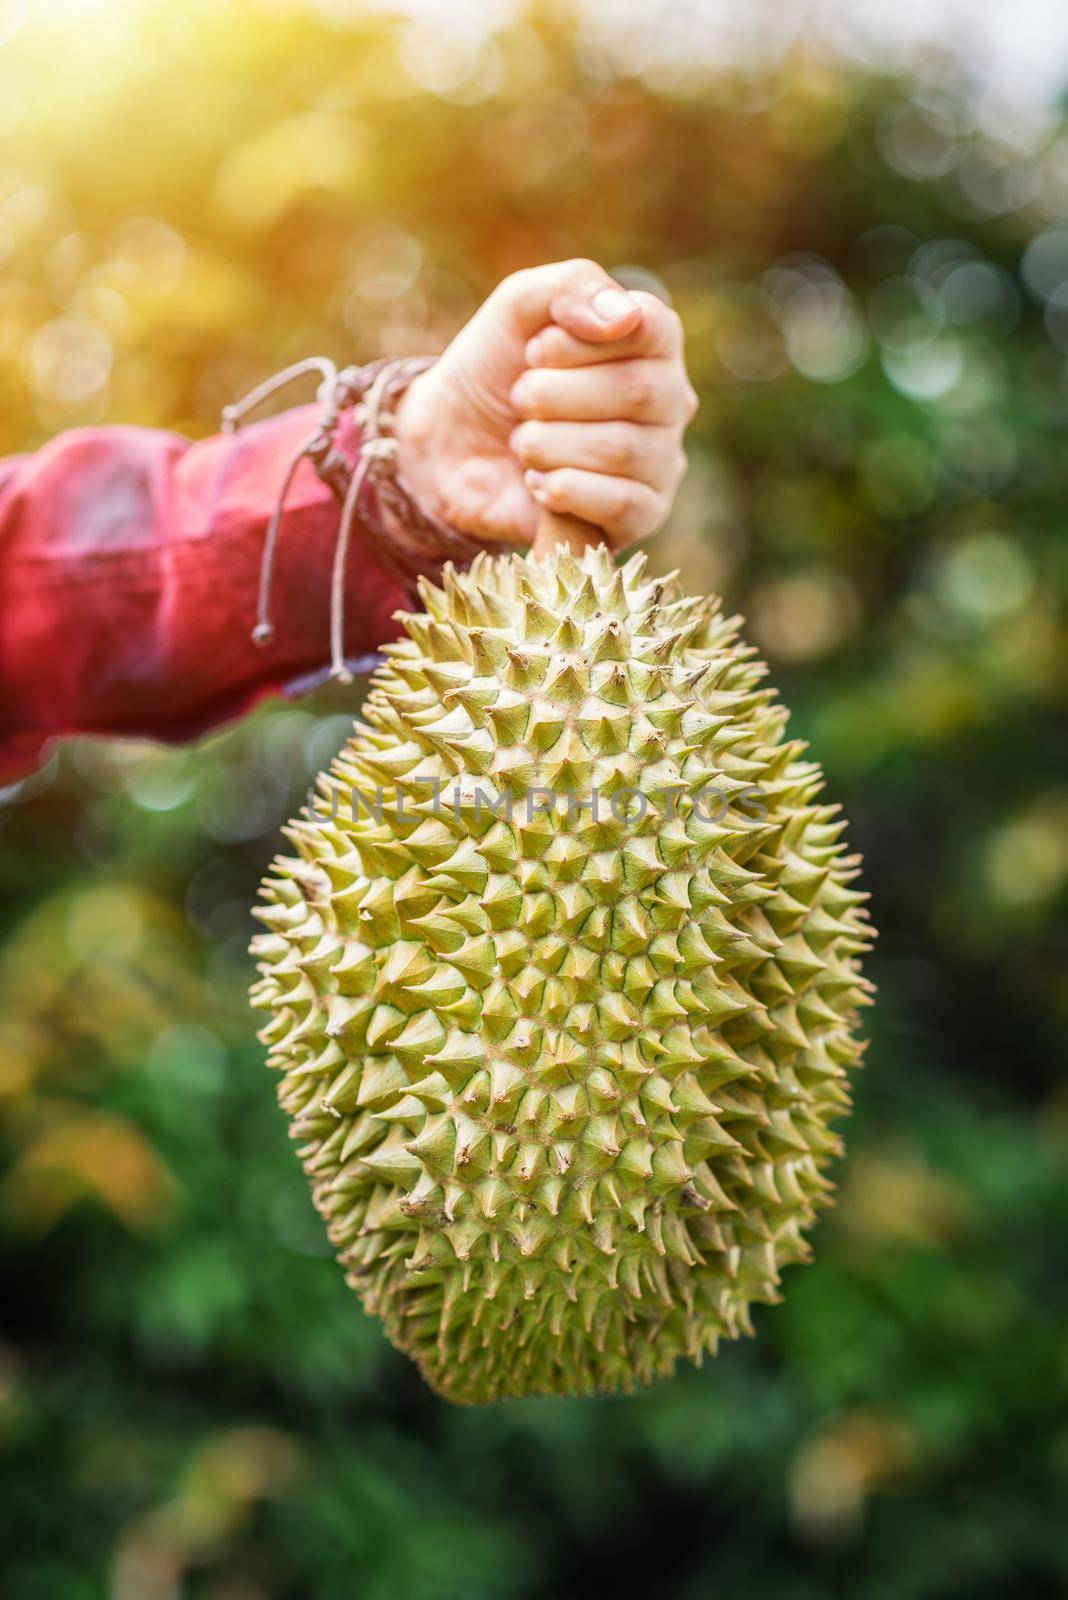 A man holding Mon Thong durian fruit in his hand. Regarded by many people in southeast asia as the king of fruits.